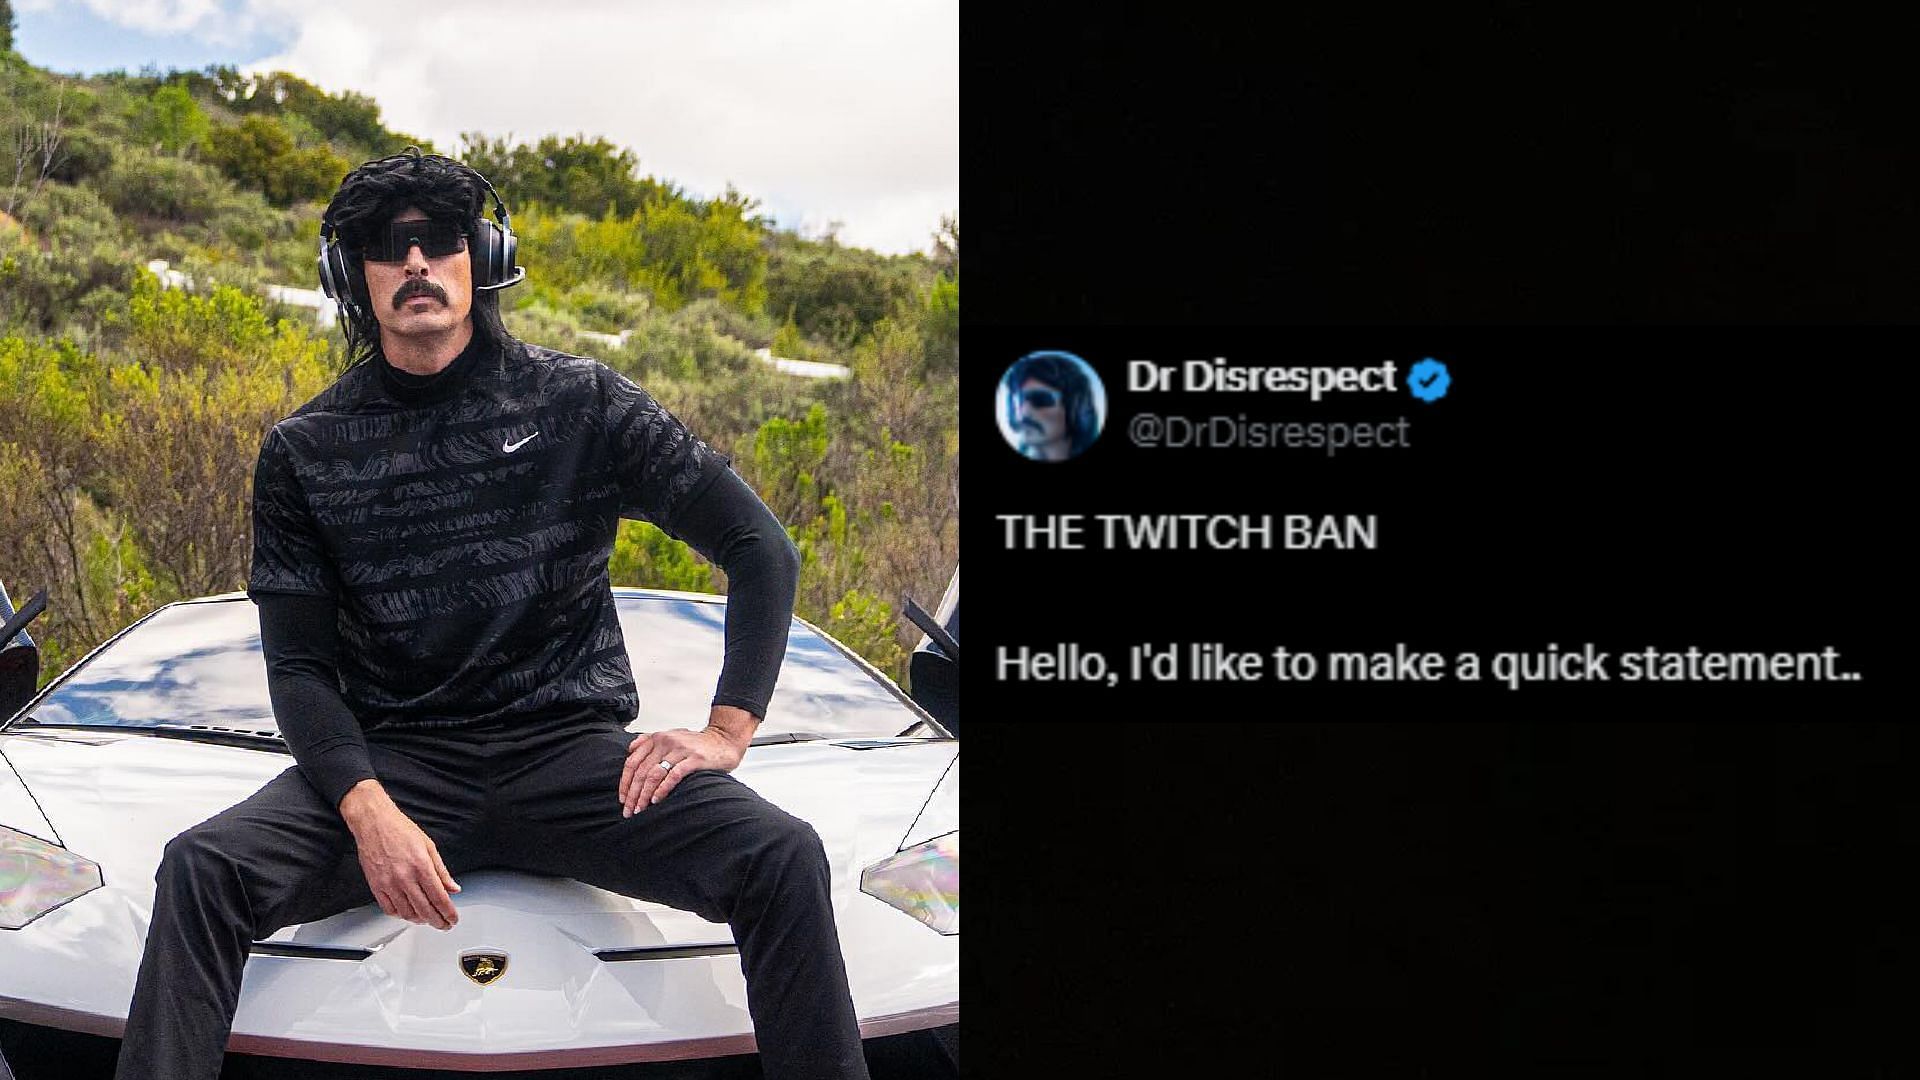 Dr Disrespect has responded to the allegations in a lengthy post on X (Image via DrDisrespect/X)